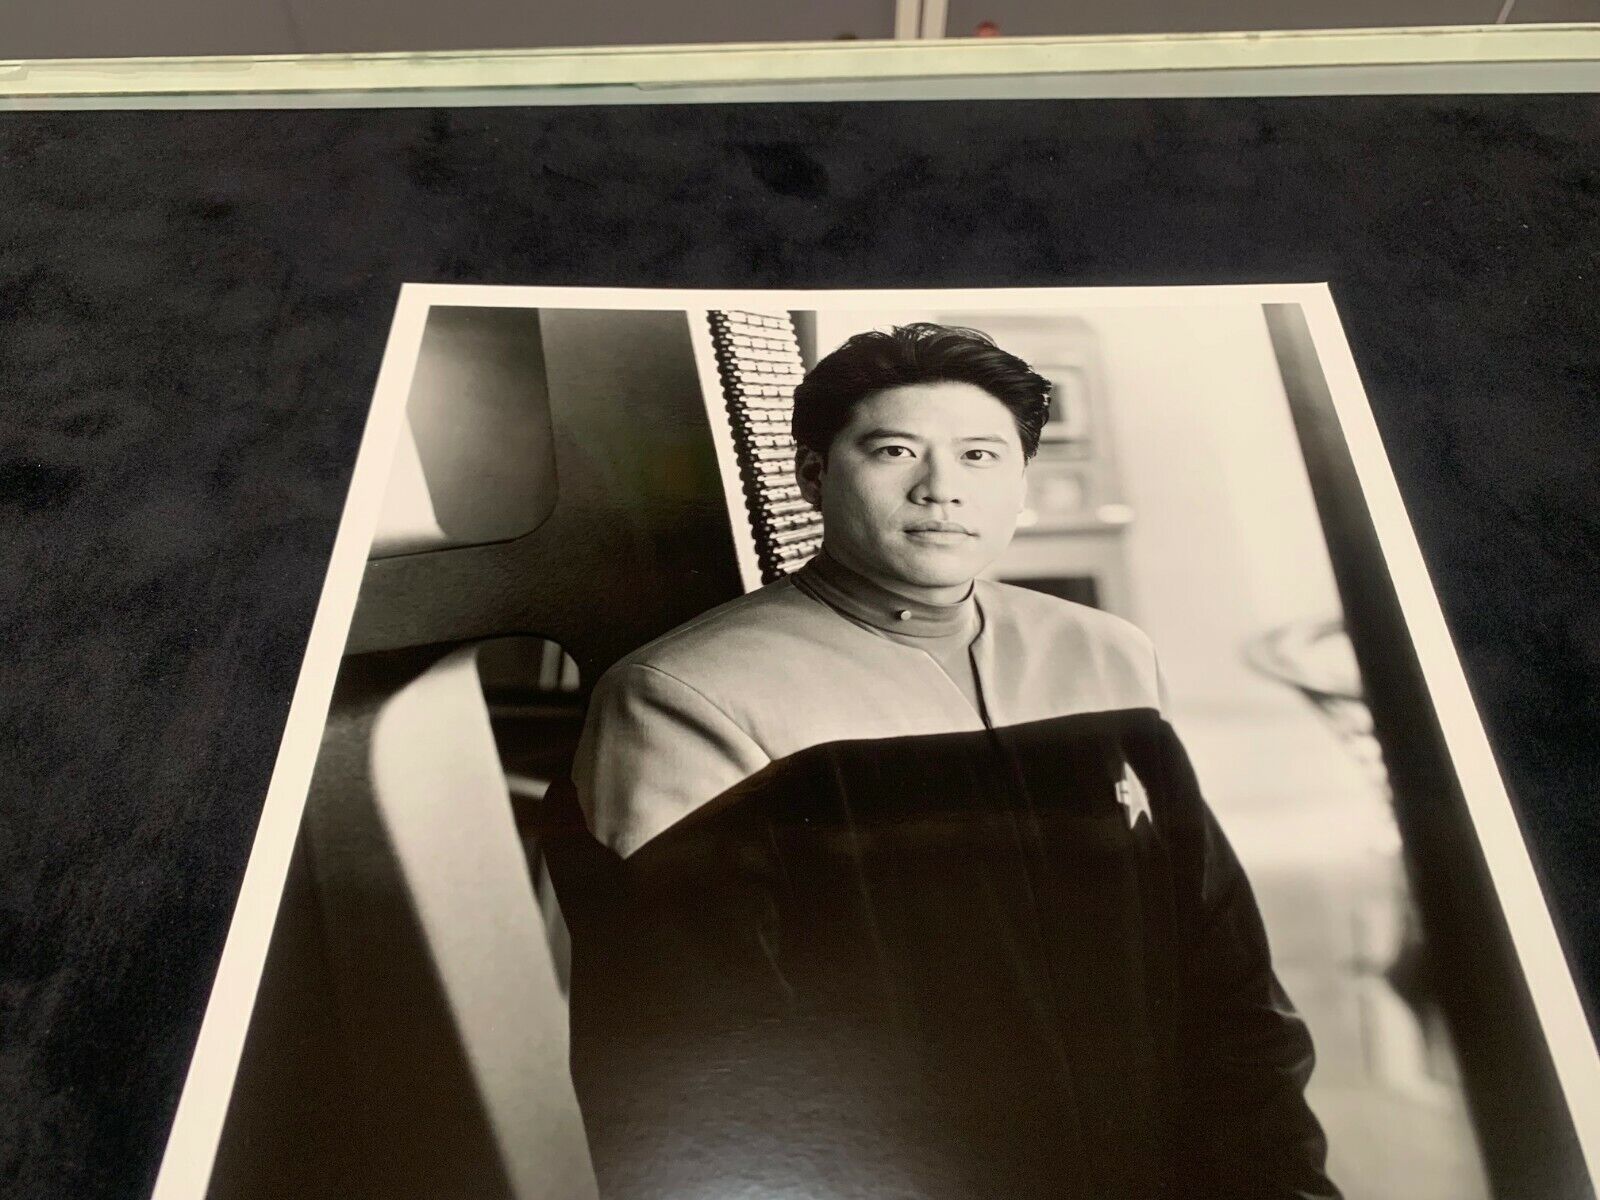 Star Trek Voyager 8x10 B&W Photo of Garret Wang in Excellent Condition